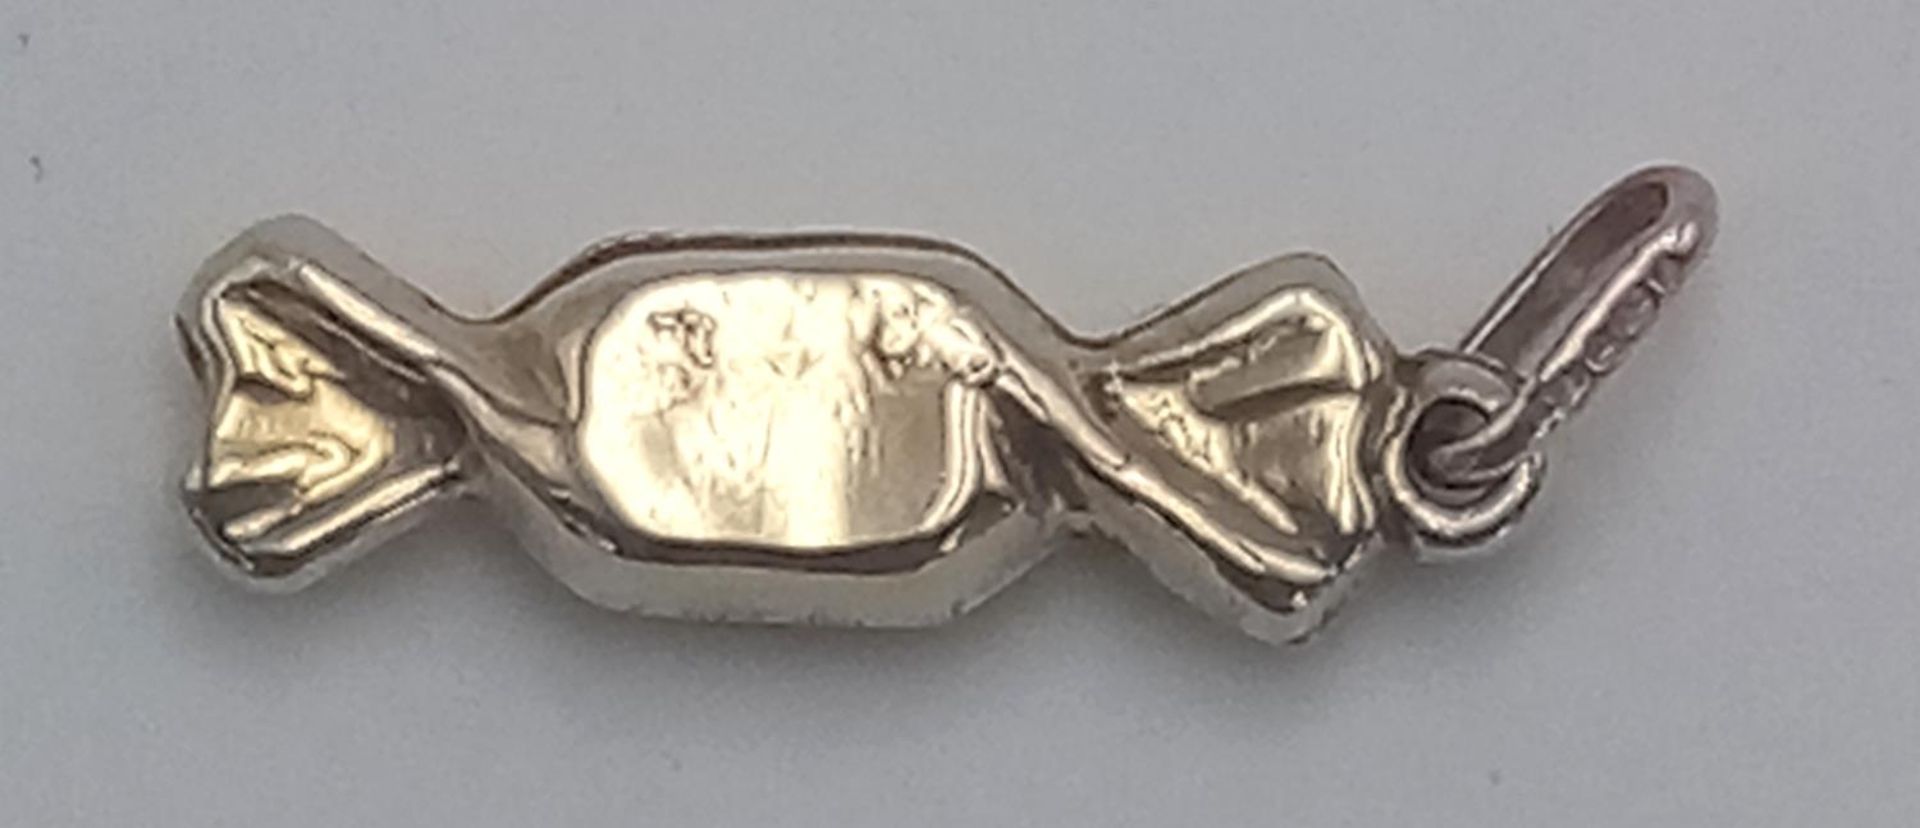 A 9K YELLOW GOLD SWEET IN WRAPPER CHARM. 29mm length, 1.2g total weight. Ref: SC 9055